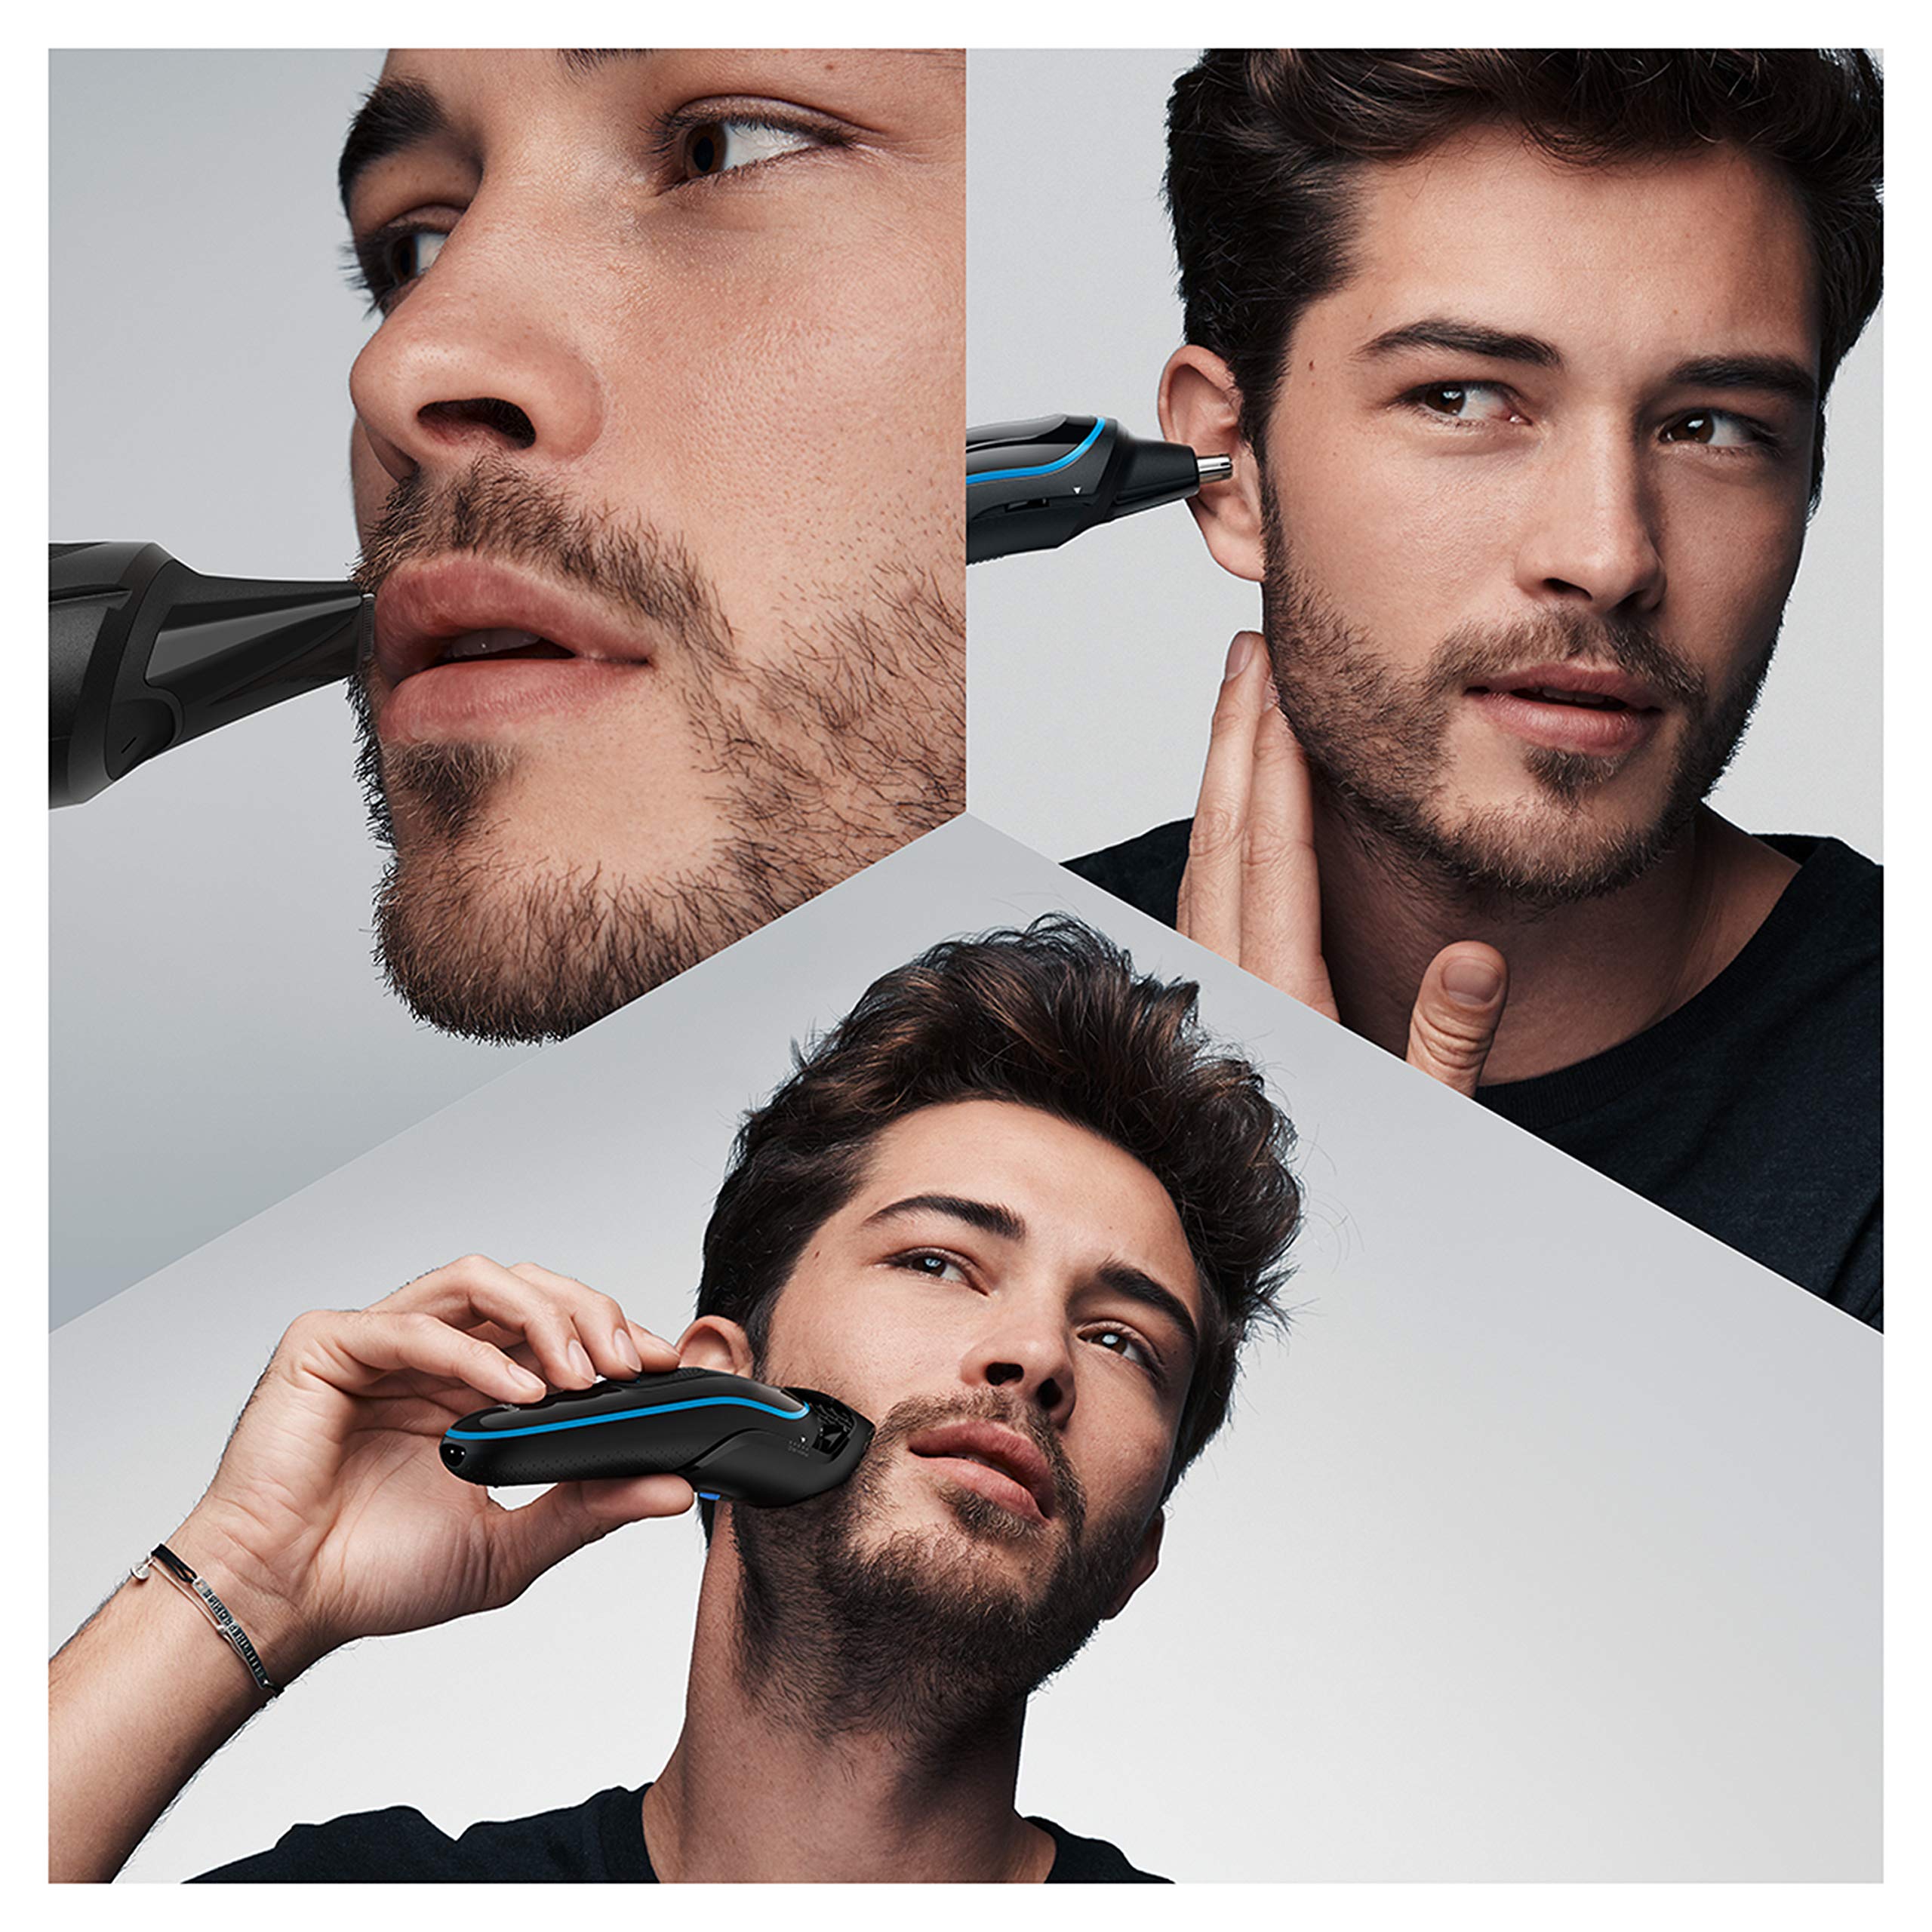 Braun Hair Clippers for Men at Best Price in Bahrain - Halabh